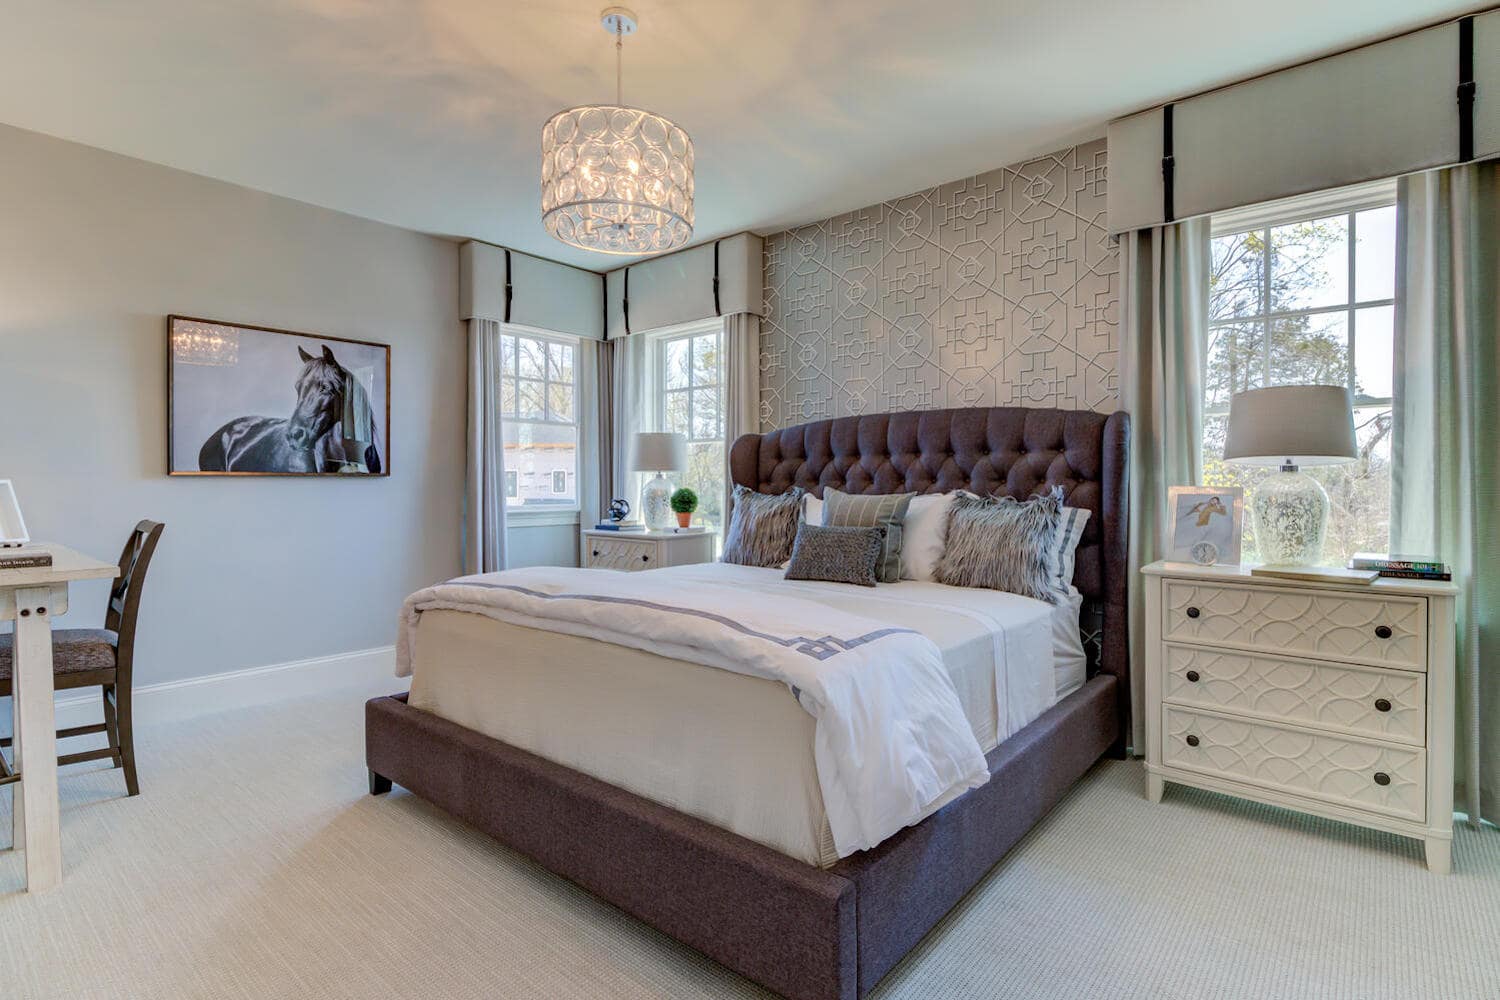 Master bedroom in a new home from Bentley Homes.